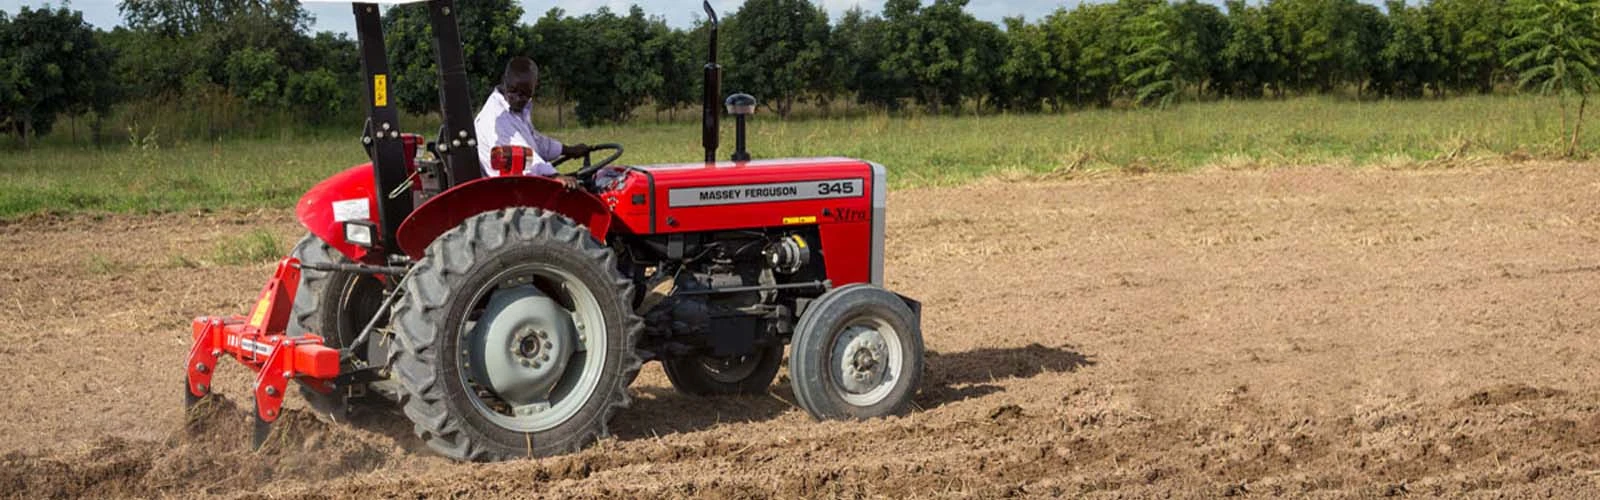 Maintenance Tips for Tractor in Nigeria